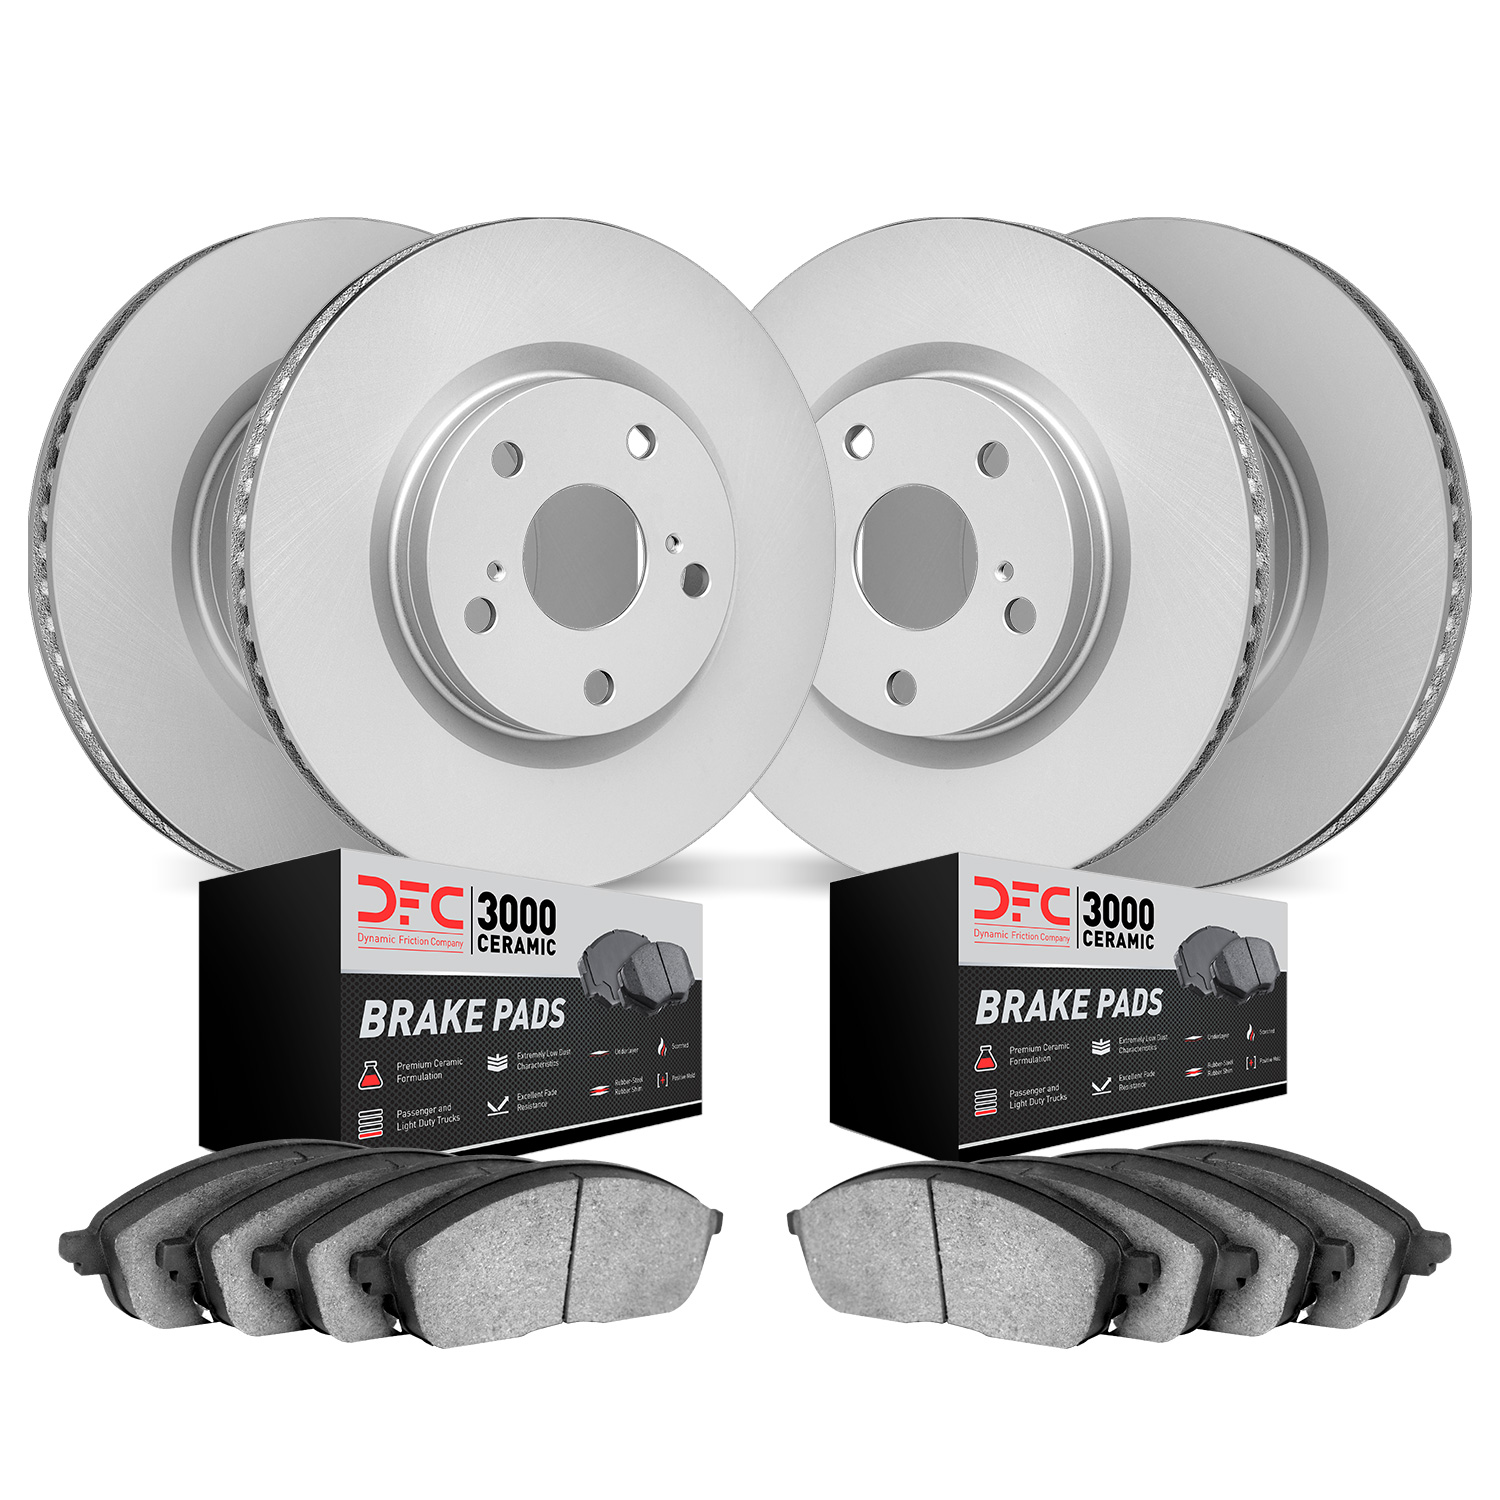 4304-68002 Geospec Brake Rotors with 3000-Series Ceramic Brake Pads Kit, 2005-2014 Infiniti/Nissan, Position: Front and Rear